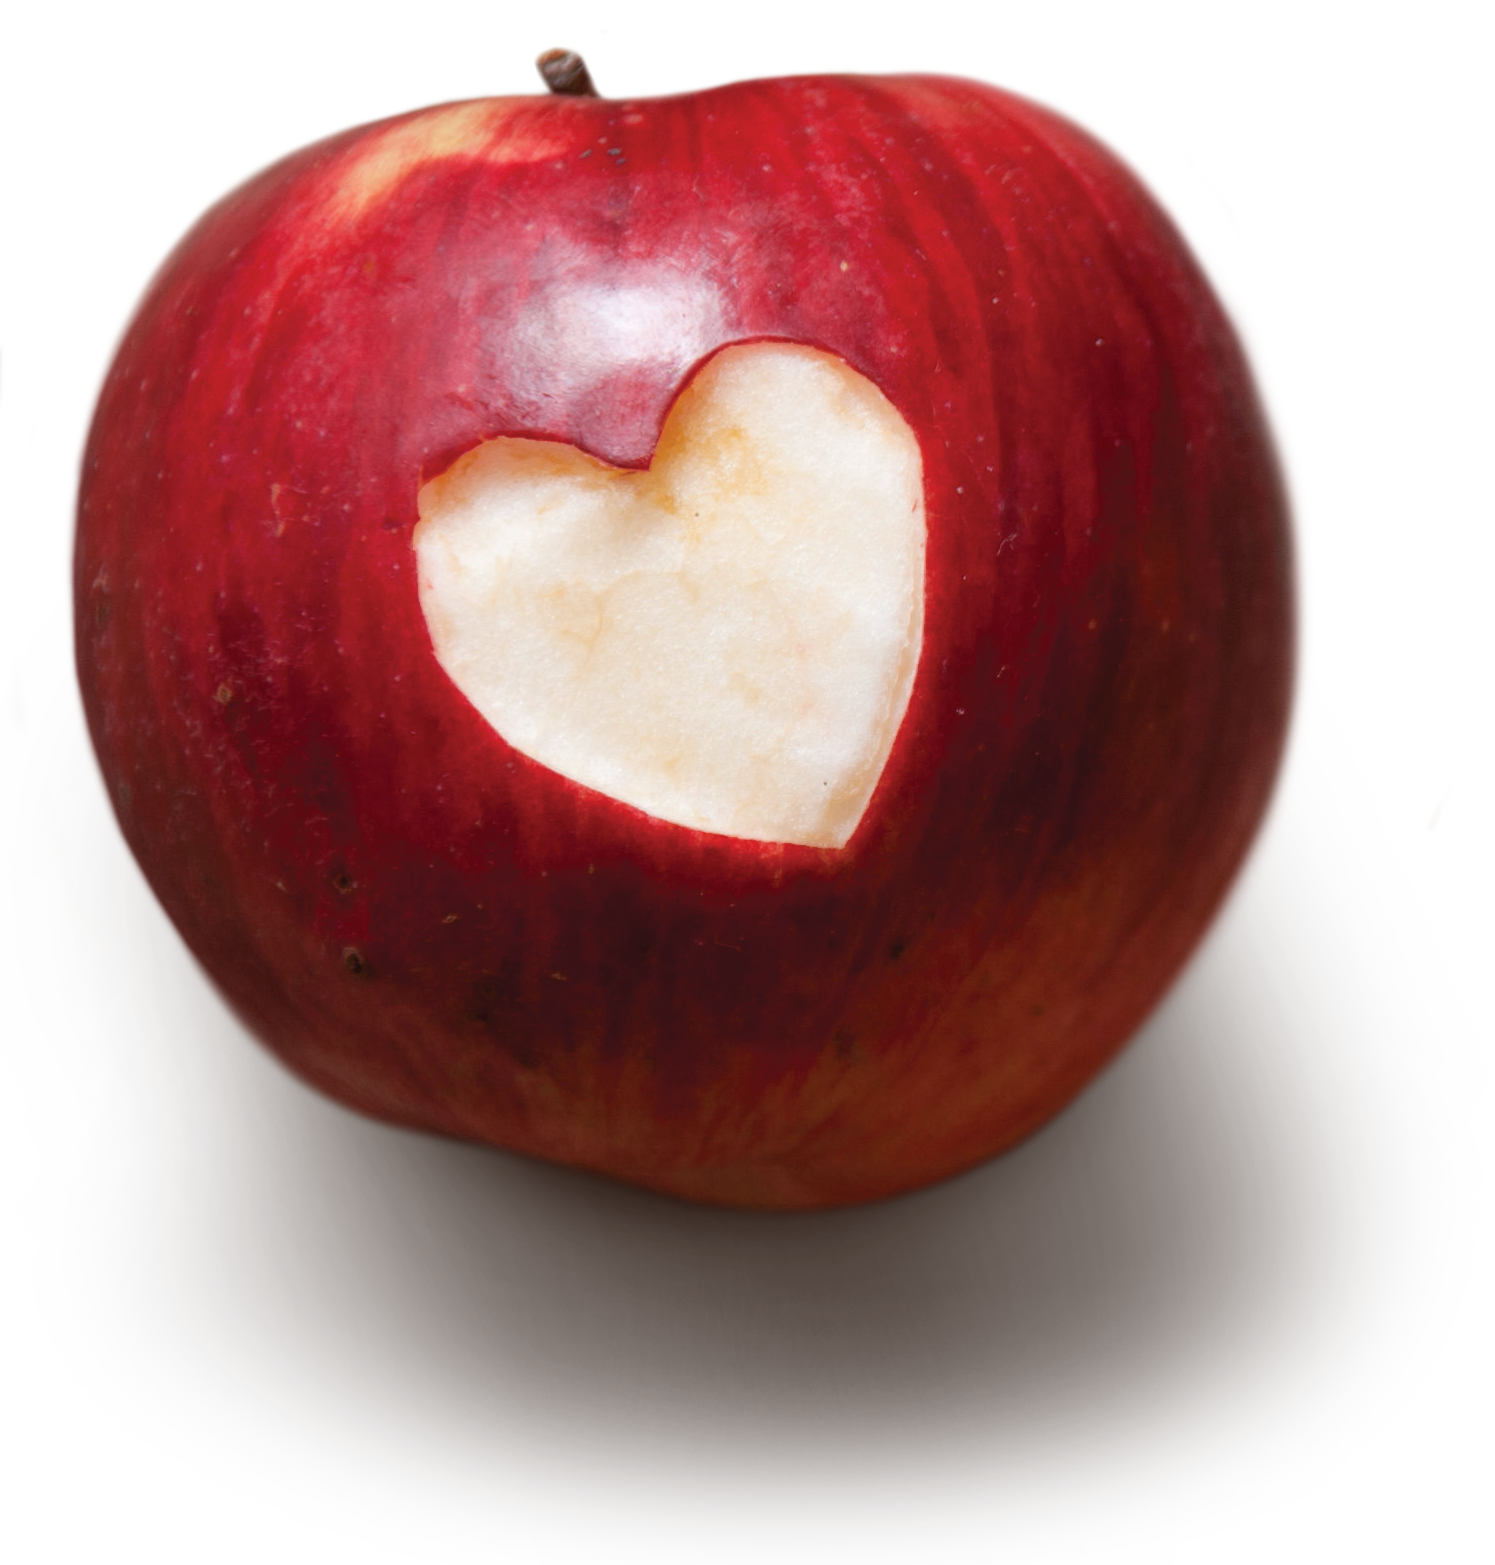 Red apple with a heart shaped hole in the skin.